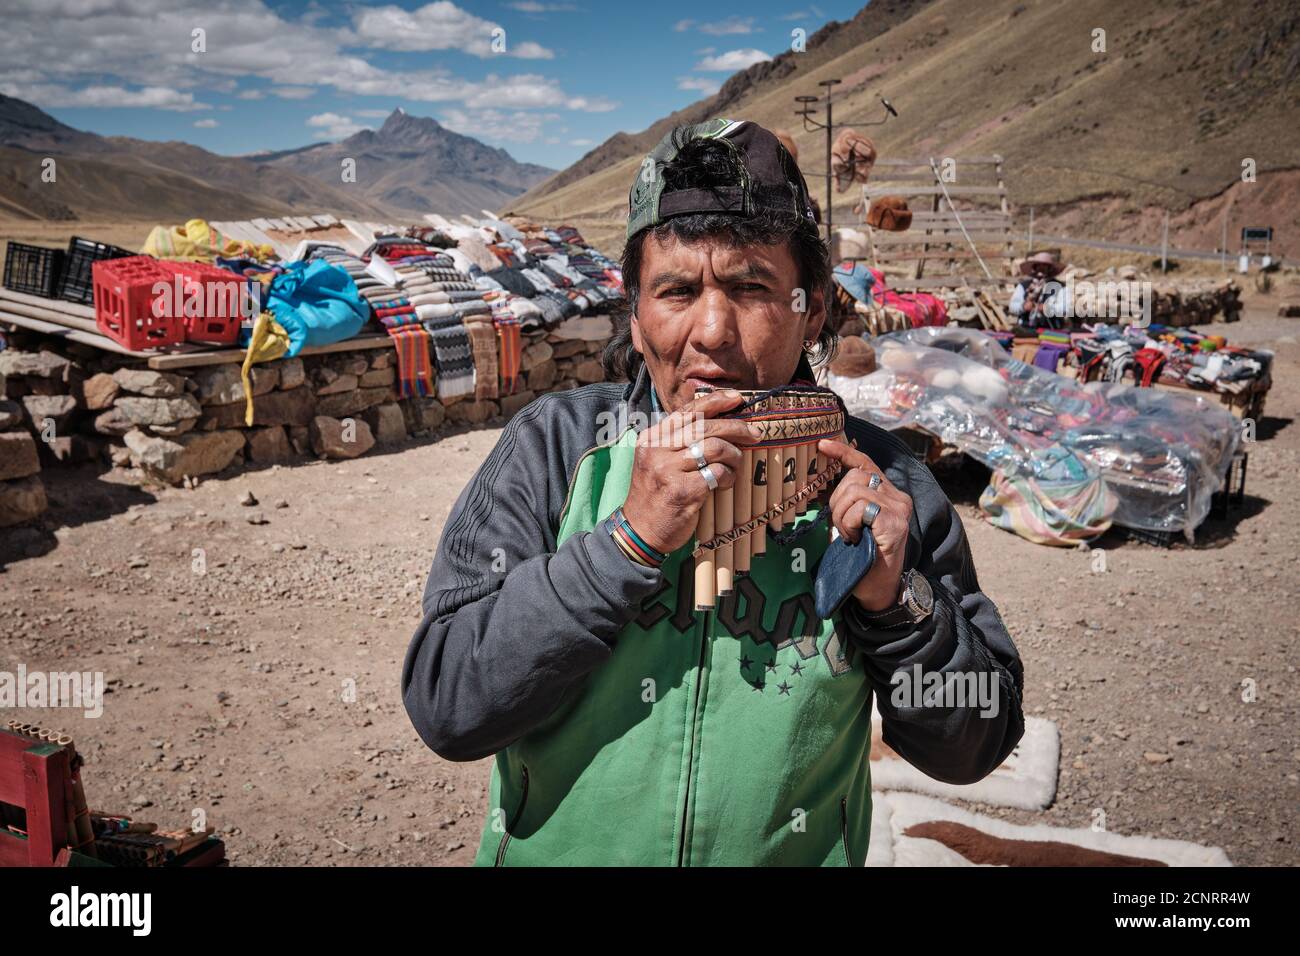 A market trader demonstrating pan pipes panpipes pan-pipes syrinx at a roadside market in the Altiplano high Andes, Peru, selling textiles and fabrics Stock Photo